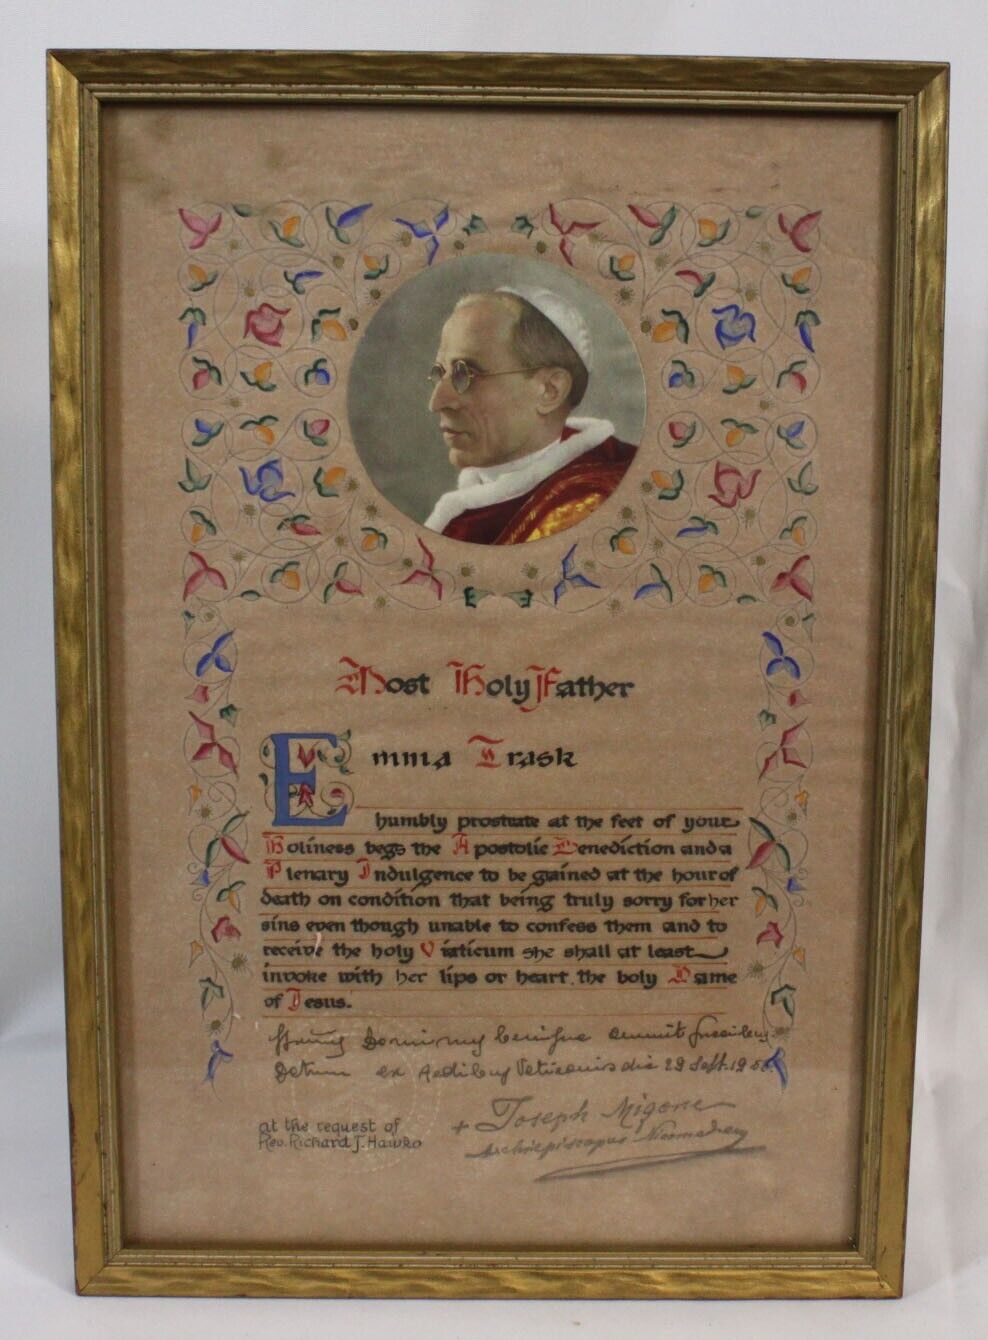 Unusual Vtg Religious Picture Certificate 1956 Confession Signed Sealed 9x13 Odd